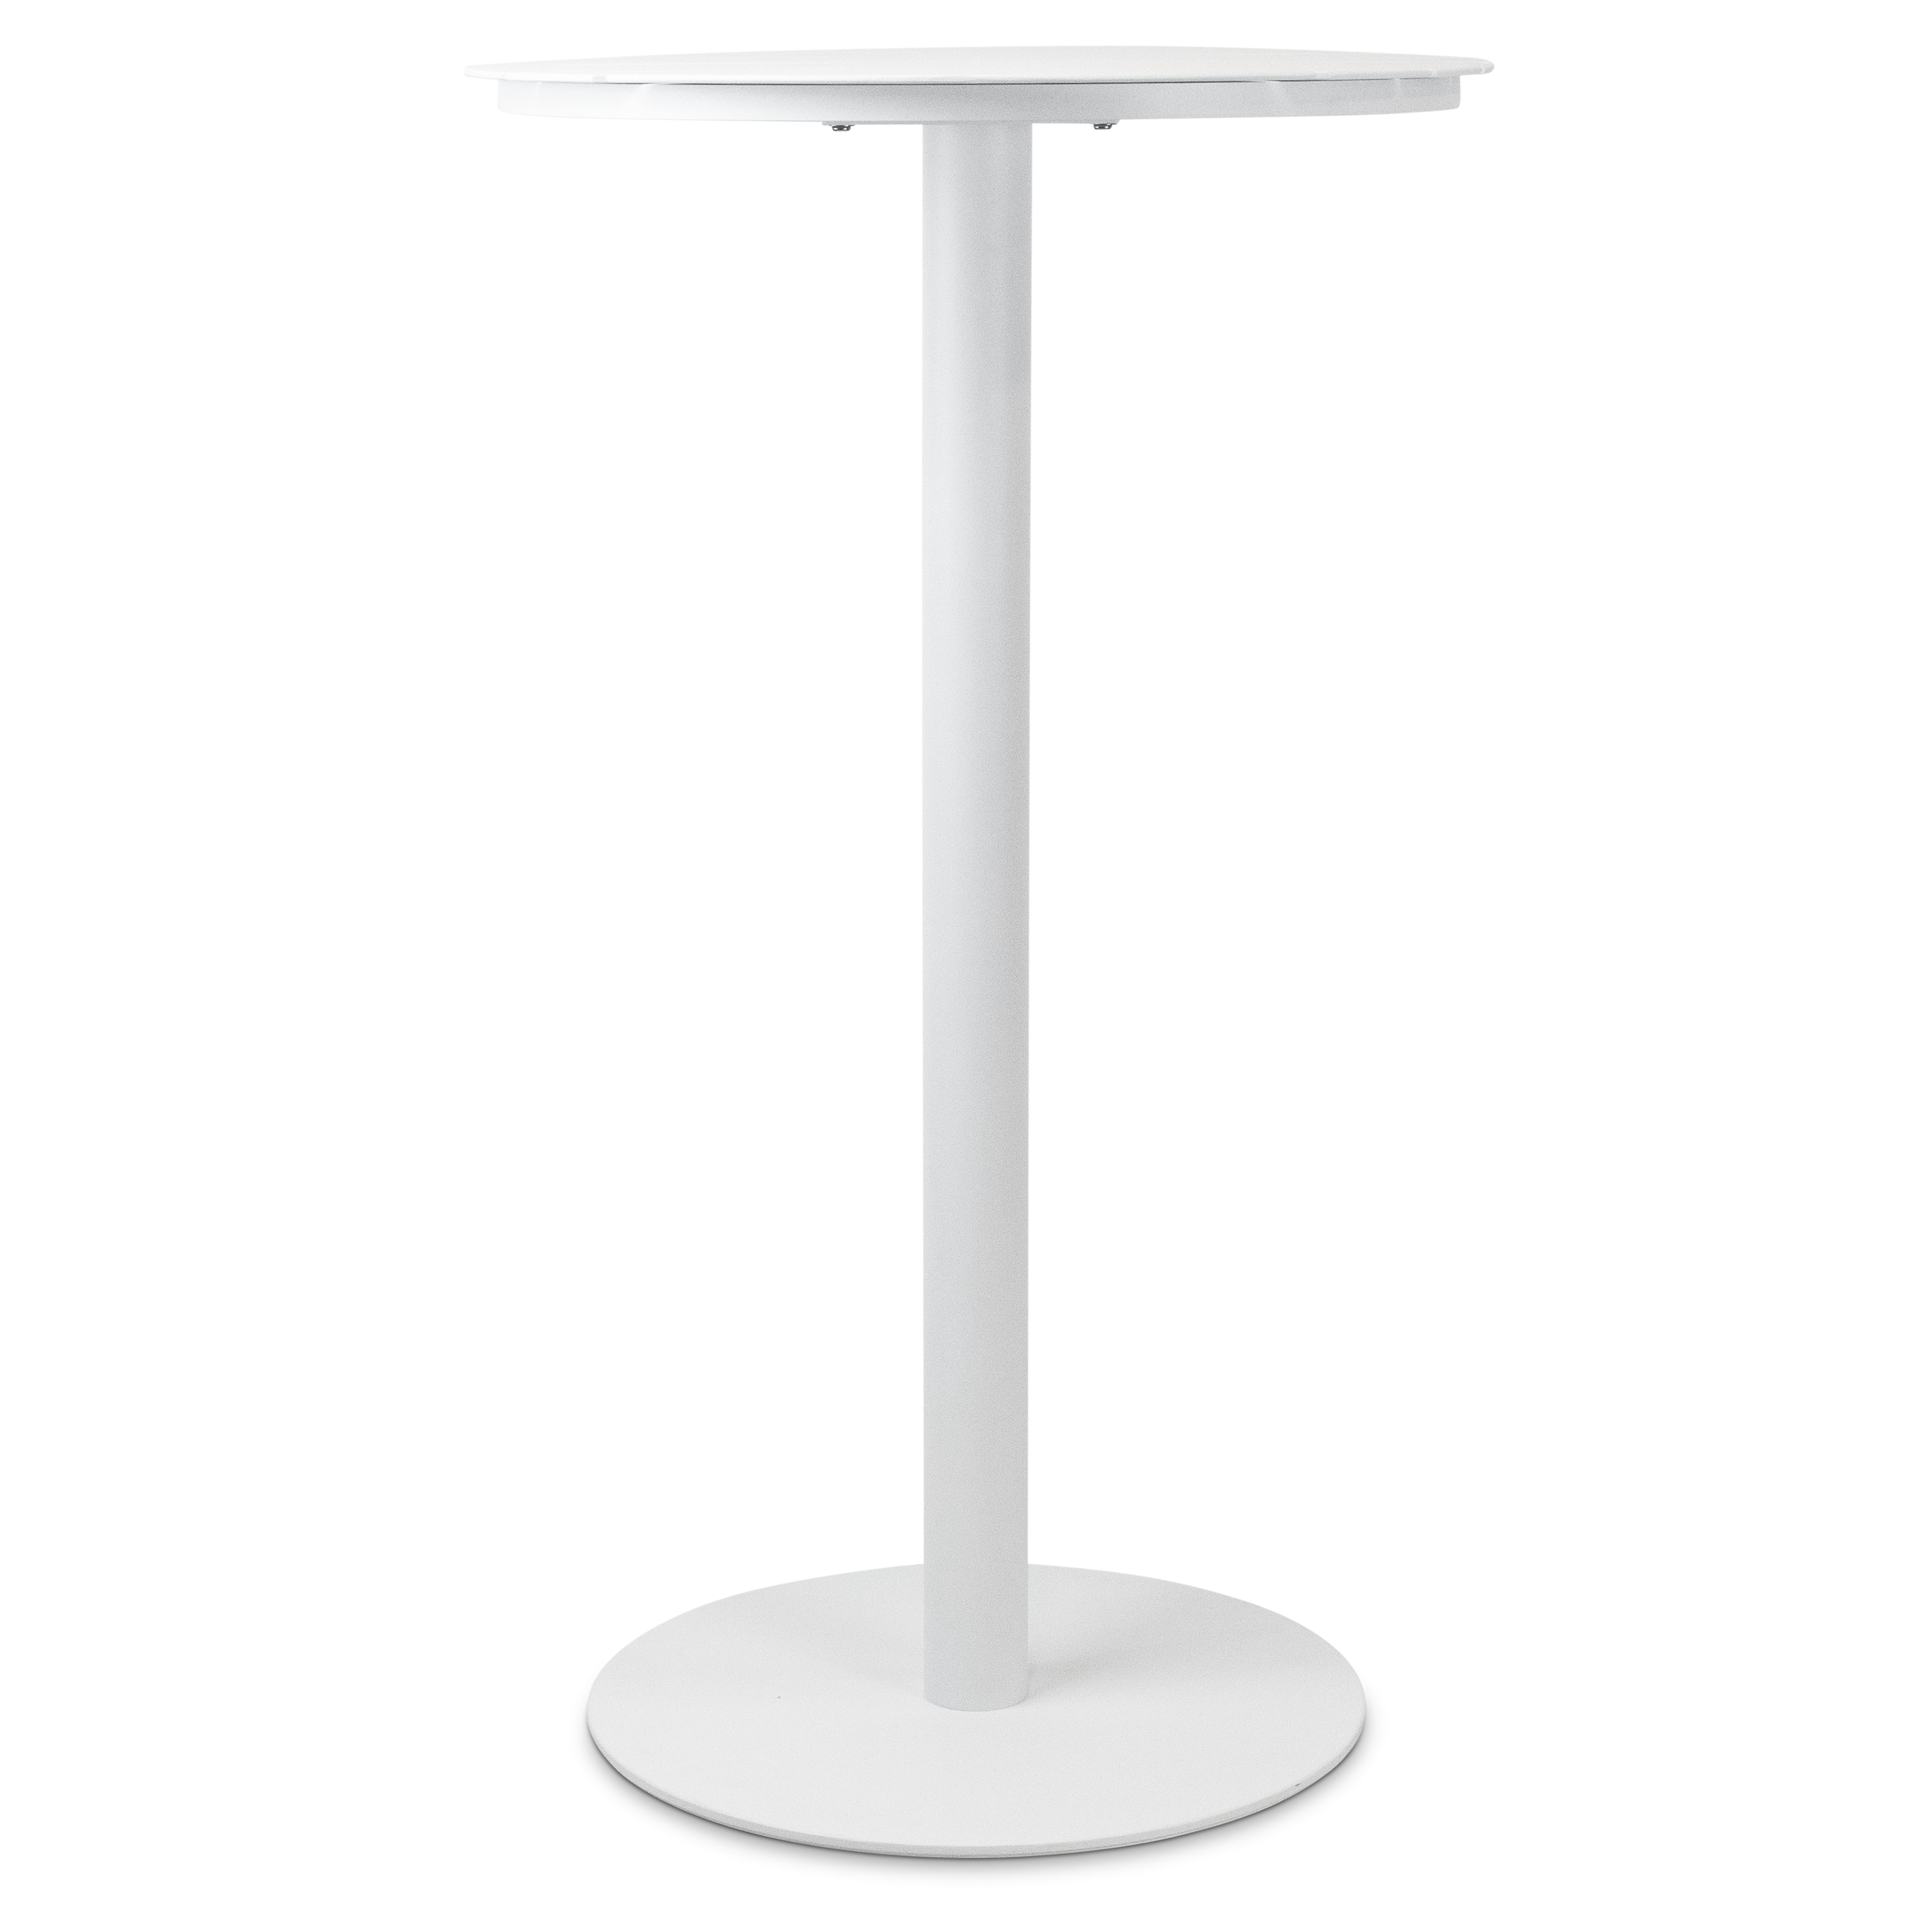 Cafe Collection Round 3pc Bar Suite in White with UV Plastic Bar Stools (PP)